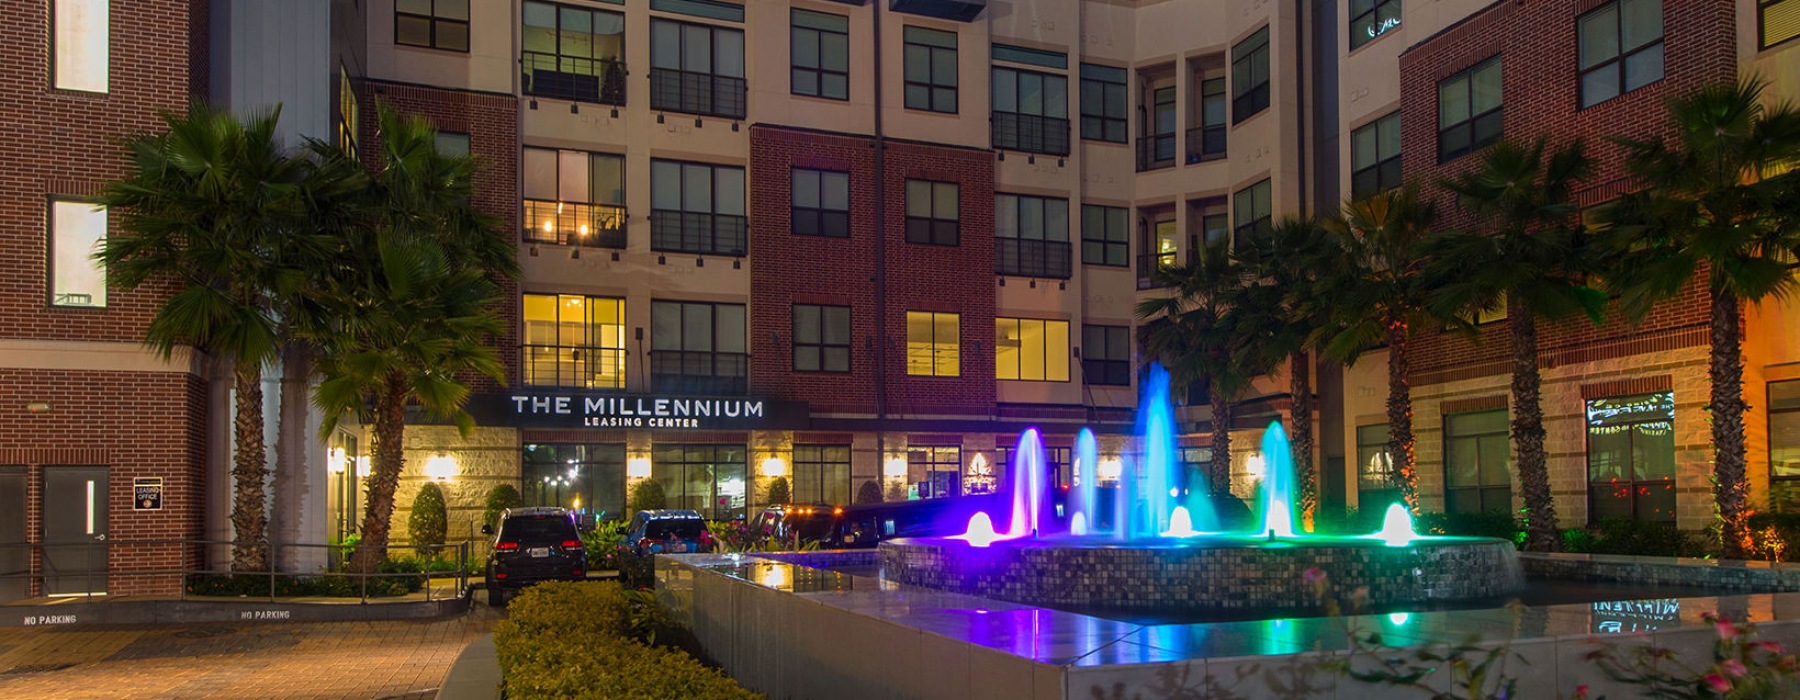 Exterior view of the fountain and entrance to Millennium High Street